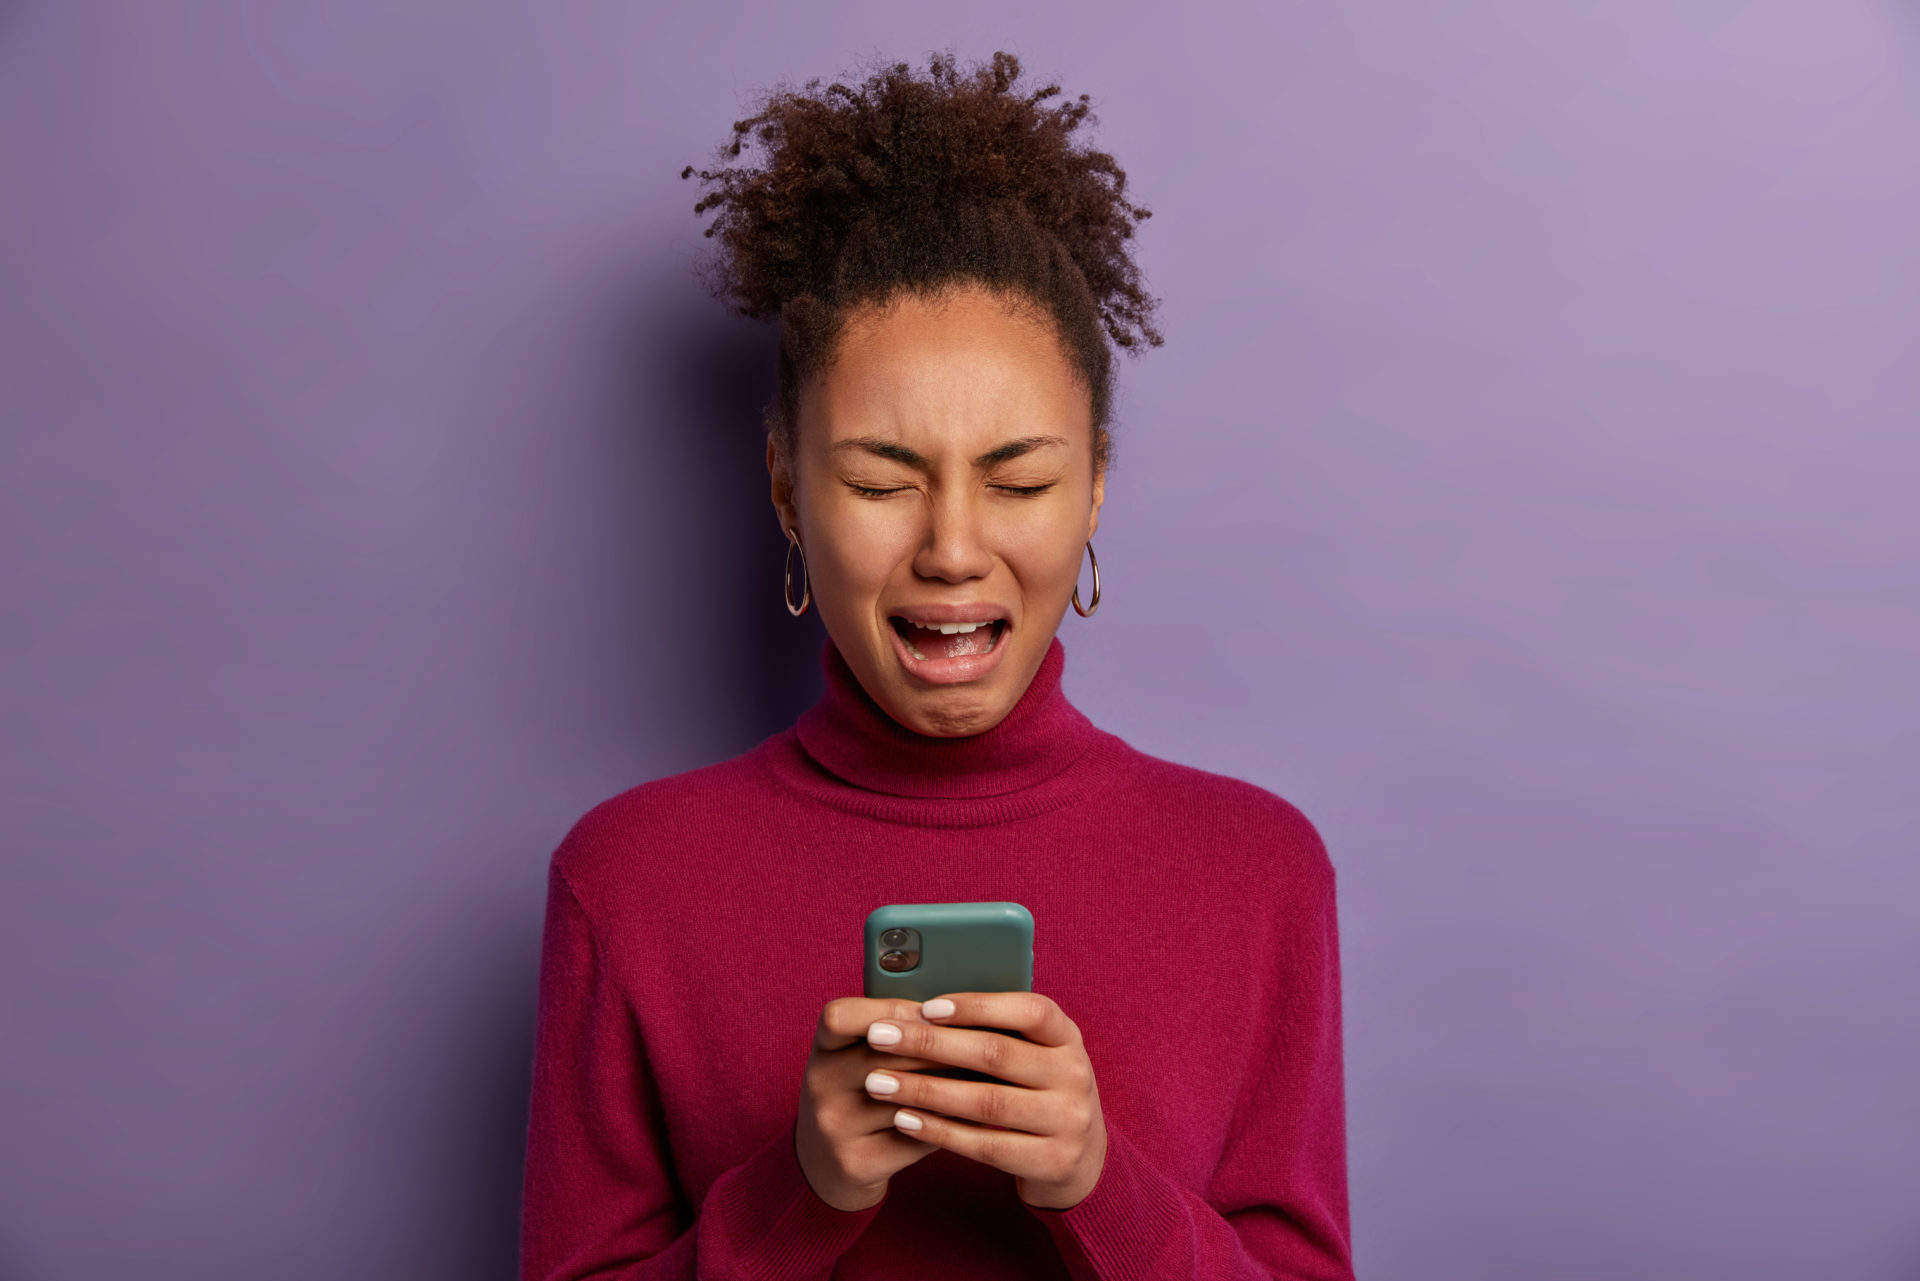 Depressed crying woman holds mobile phone in her hands, wears burgundy turtleneck, upset not to receive message from boyfriend, has no money to call friend, stands with sorrowful expression.